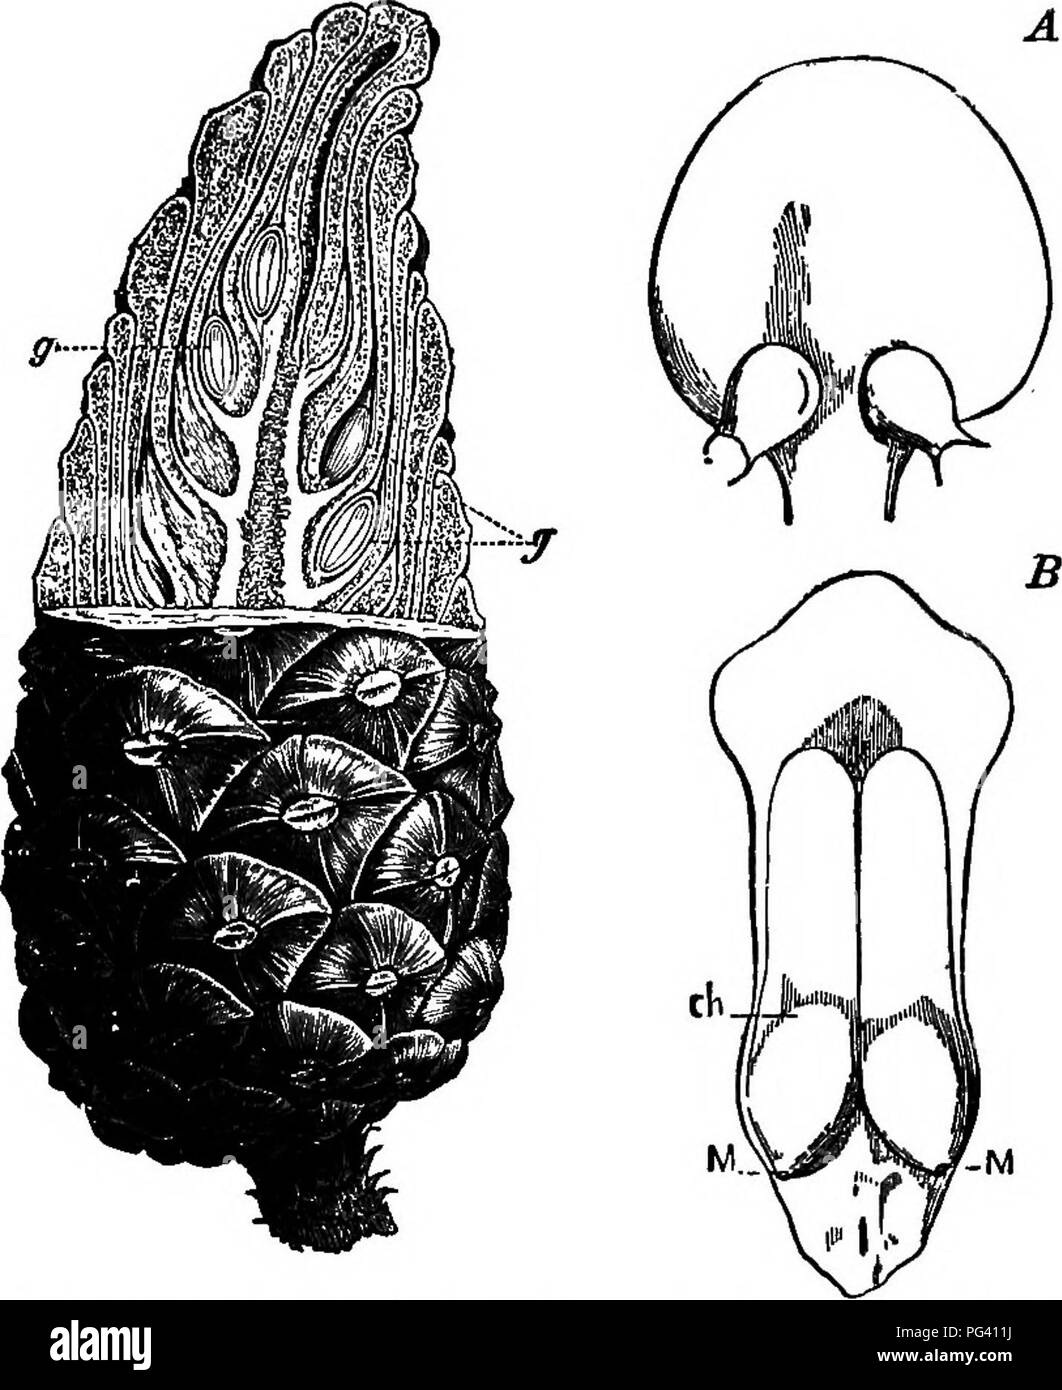 . The essentials of botany. Botany. PHANEROGAMIA. 217 generally called—are loose cones generally crowded into considerable clusters. Each cone consists of a stem upon which are many flattish stamens, each bearing two pollen- sacs (Fig. 120). 462. The pollen-cells are roundish, and covered by a. Fig. 122.—a ripe cone of a Fine, partly cut away to show the position of the seeds, g A,e, scale from a young;cone, upjier side sho'*ing two ovules (enlarged); B, the same when mature, showing: two winged seeds, ch. Each seed-coat has a small pore, M, through which the first root will grow in germinati Stock Photo